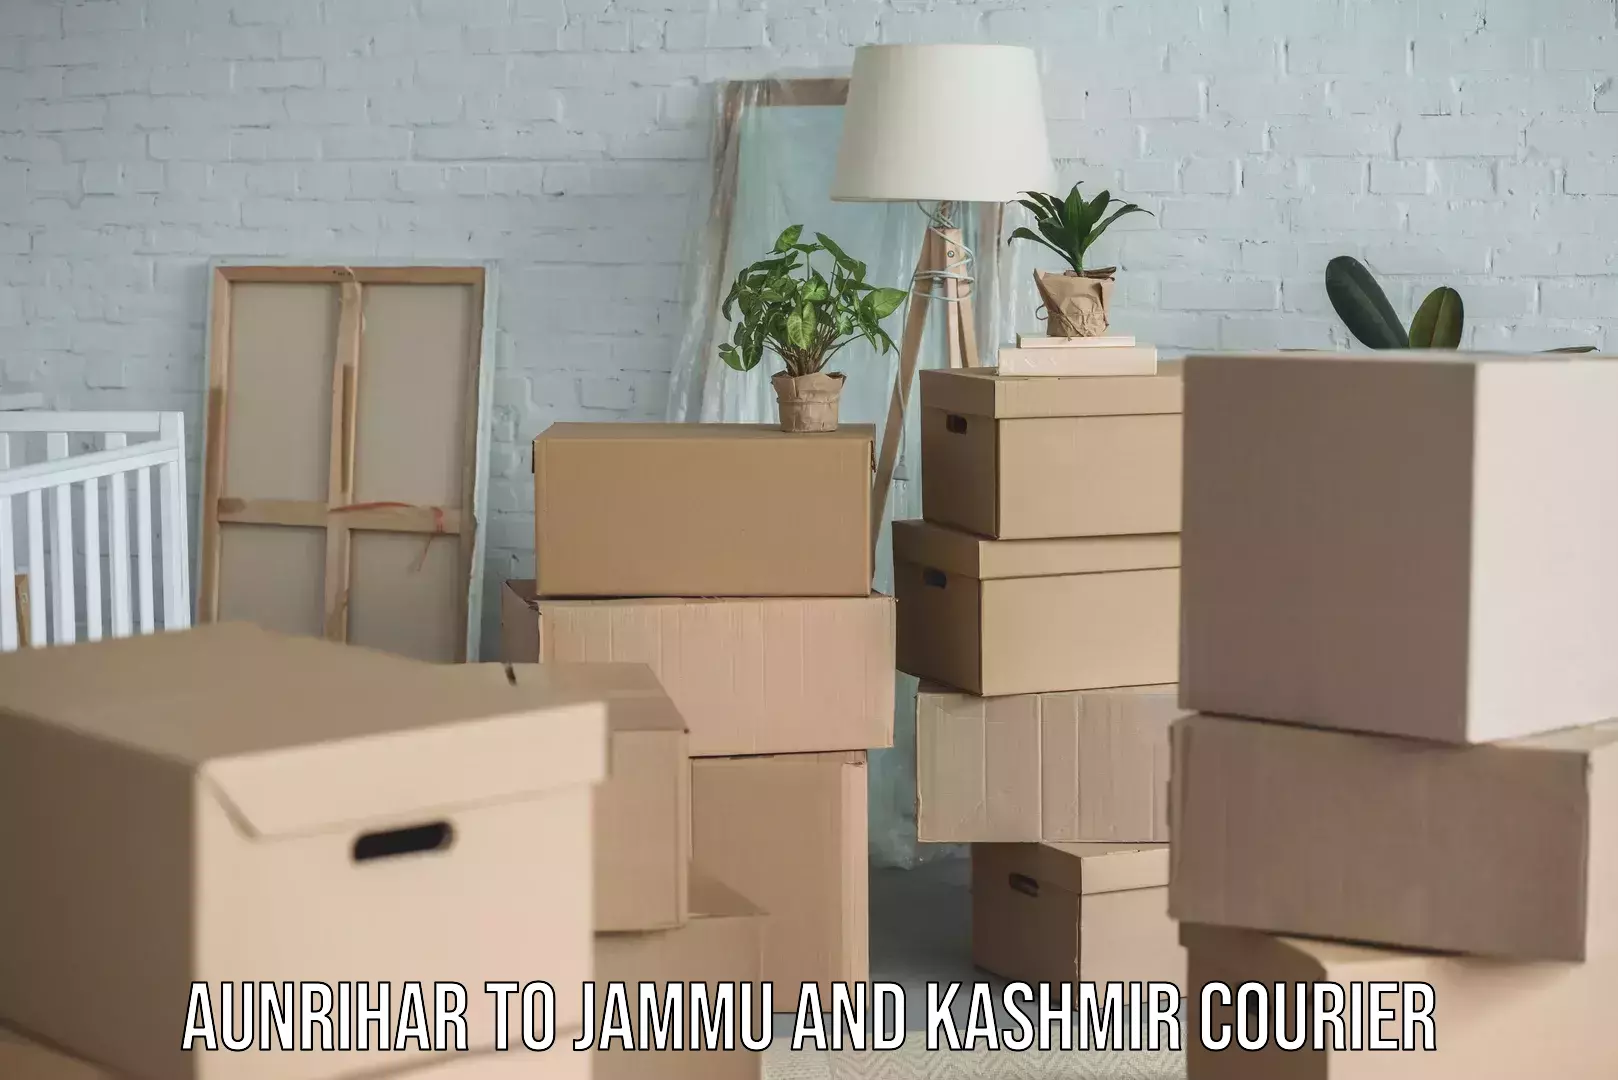 Round-the-clock parcel delivery Aunrihar to Jammu and Kashmir